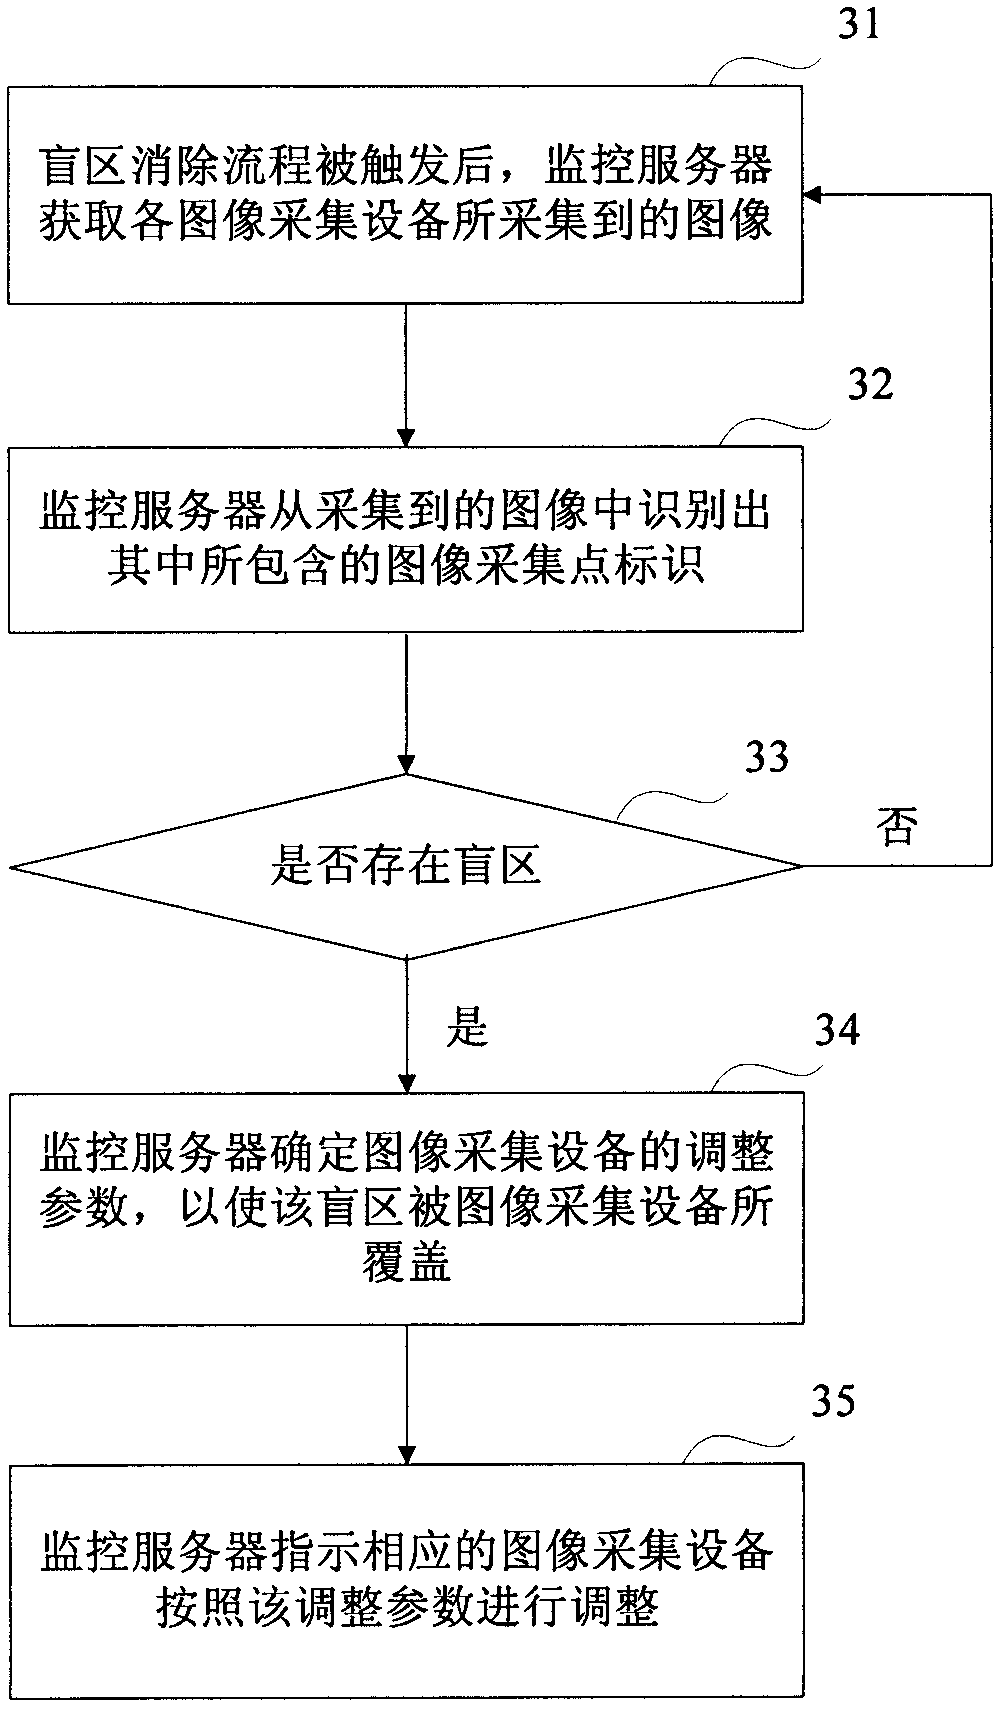 Method and device for video monitoring